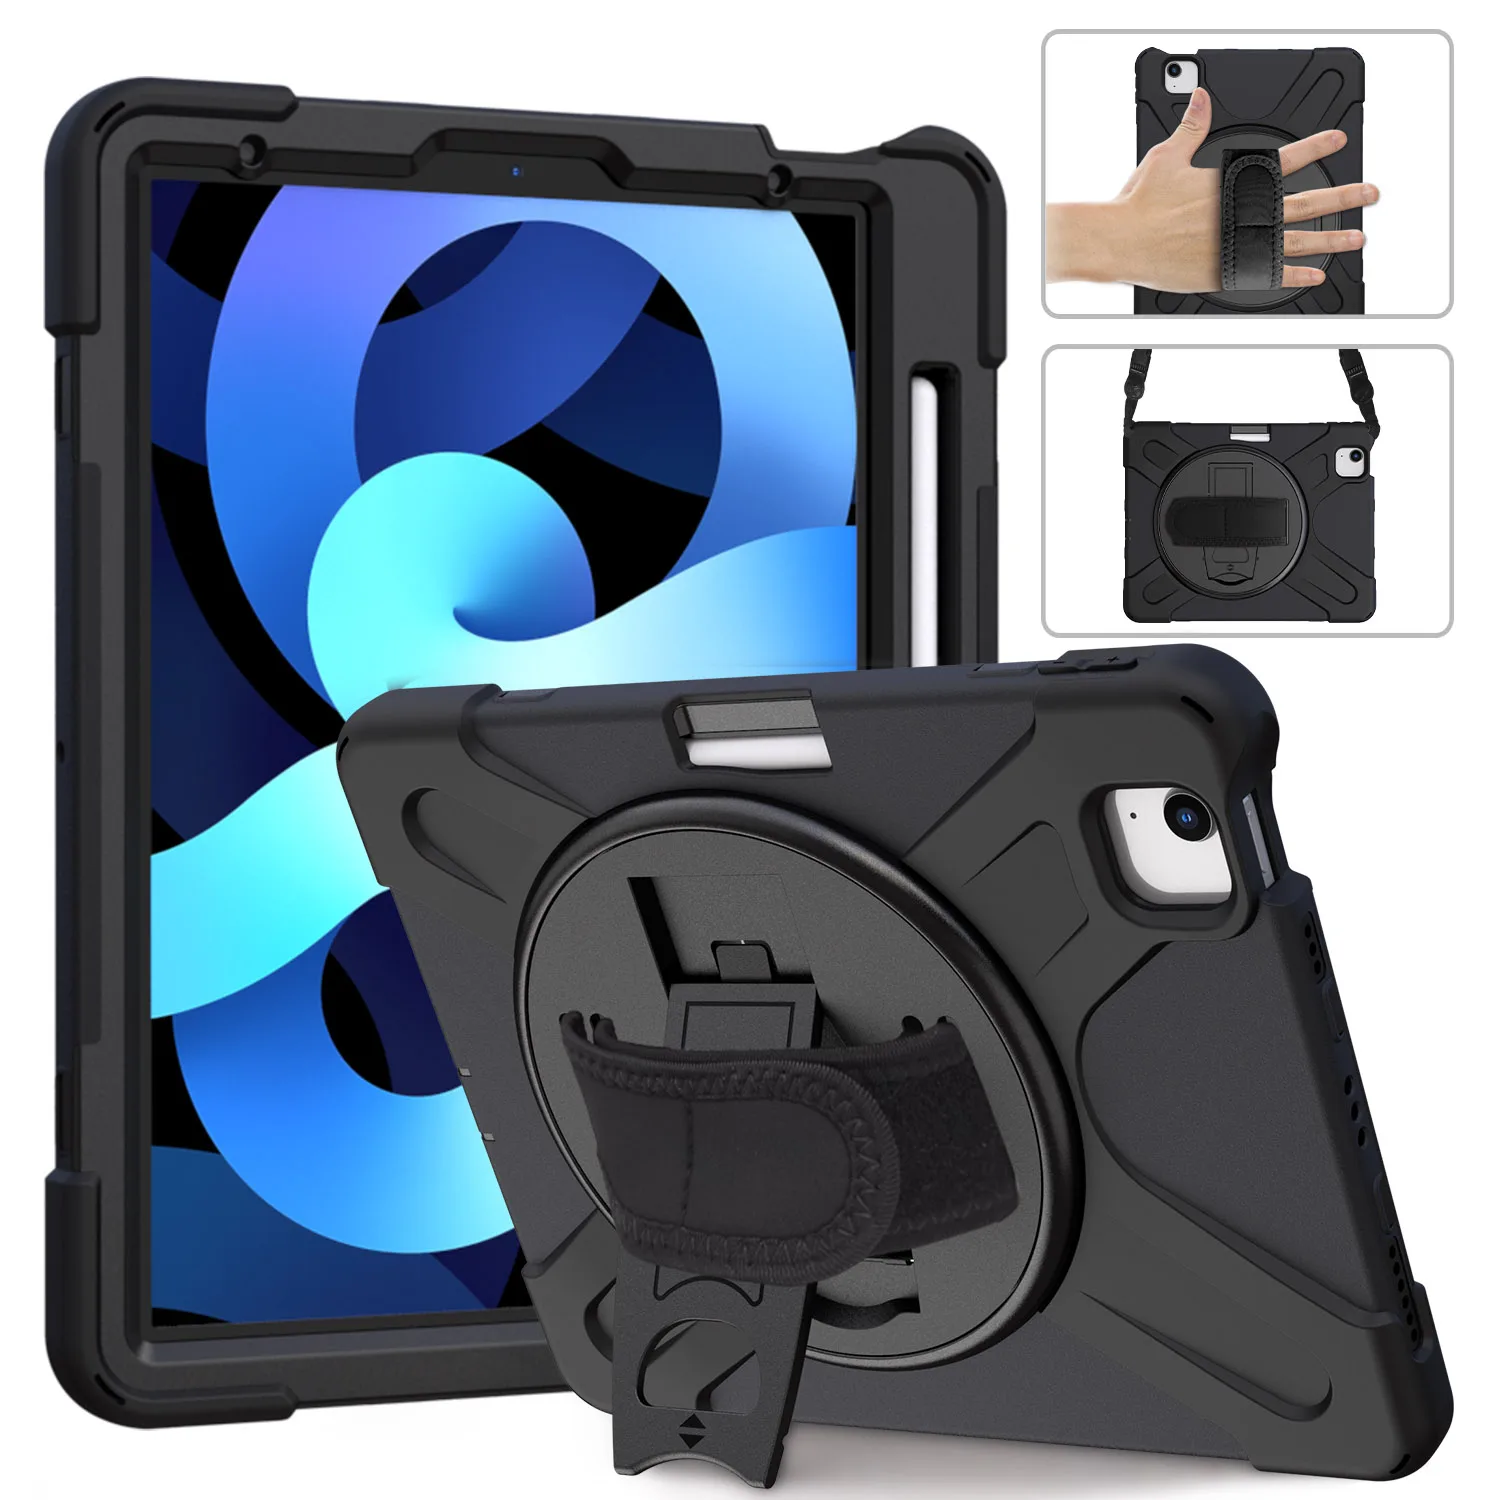 

HXCASE for ipad 2 3 4 5 6 ipad Air 1 2 Generation 9.7 Shoulder Strap Cases 9.7 with 360 Rotation Kickstand and Hand Straps